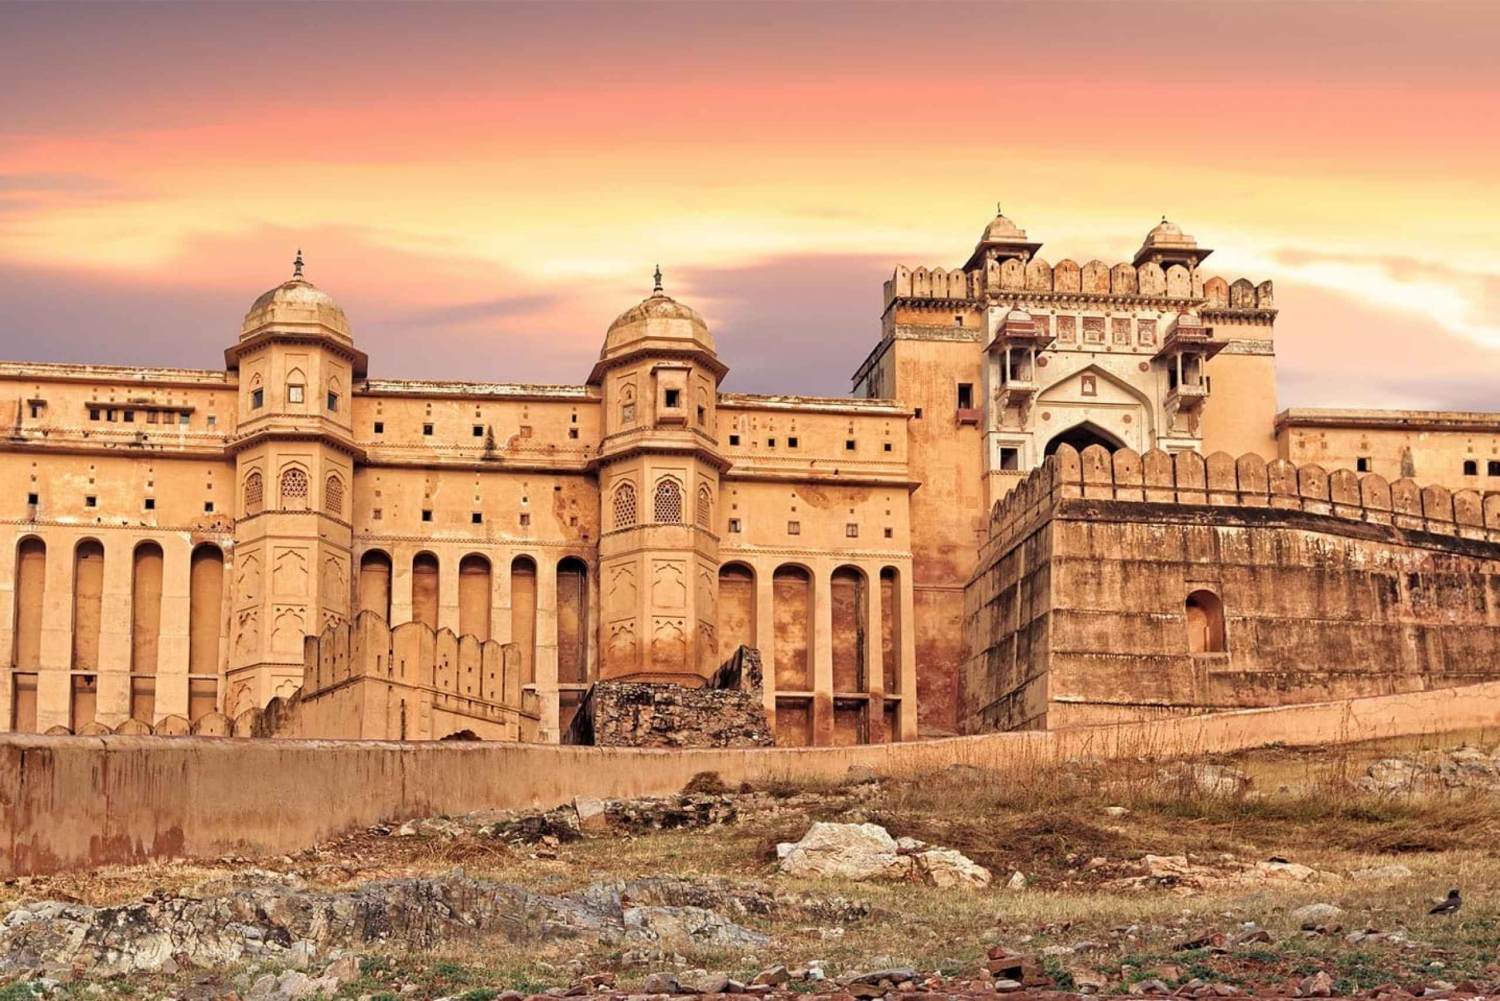 Private 4-Day Golden Triangle Luxury Tour from Delhi